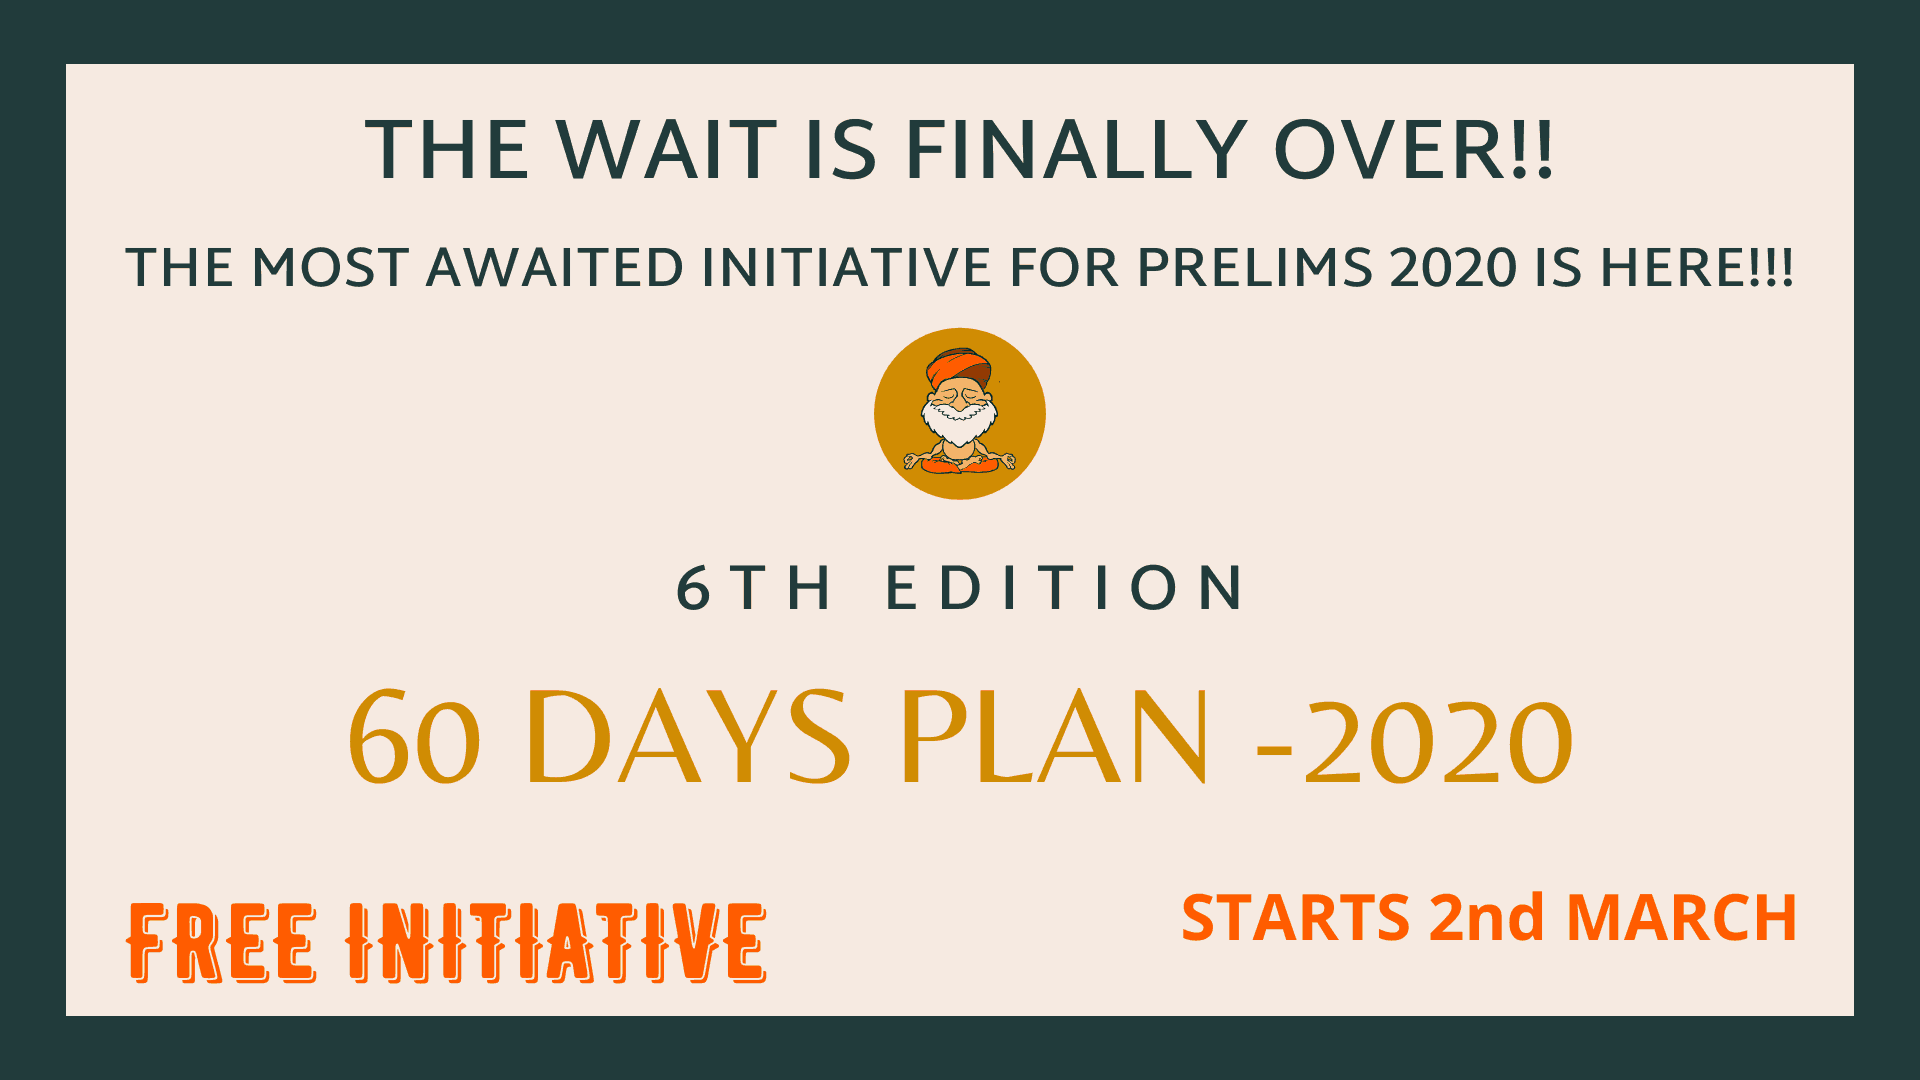 60 Day Programme, 2020: IAS UPSC PRELIMS EXAMINATION 2020 – IASbaba’s most trusted initiative for PRELIMS – FREE Initiative!